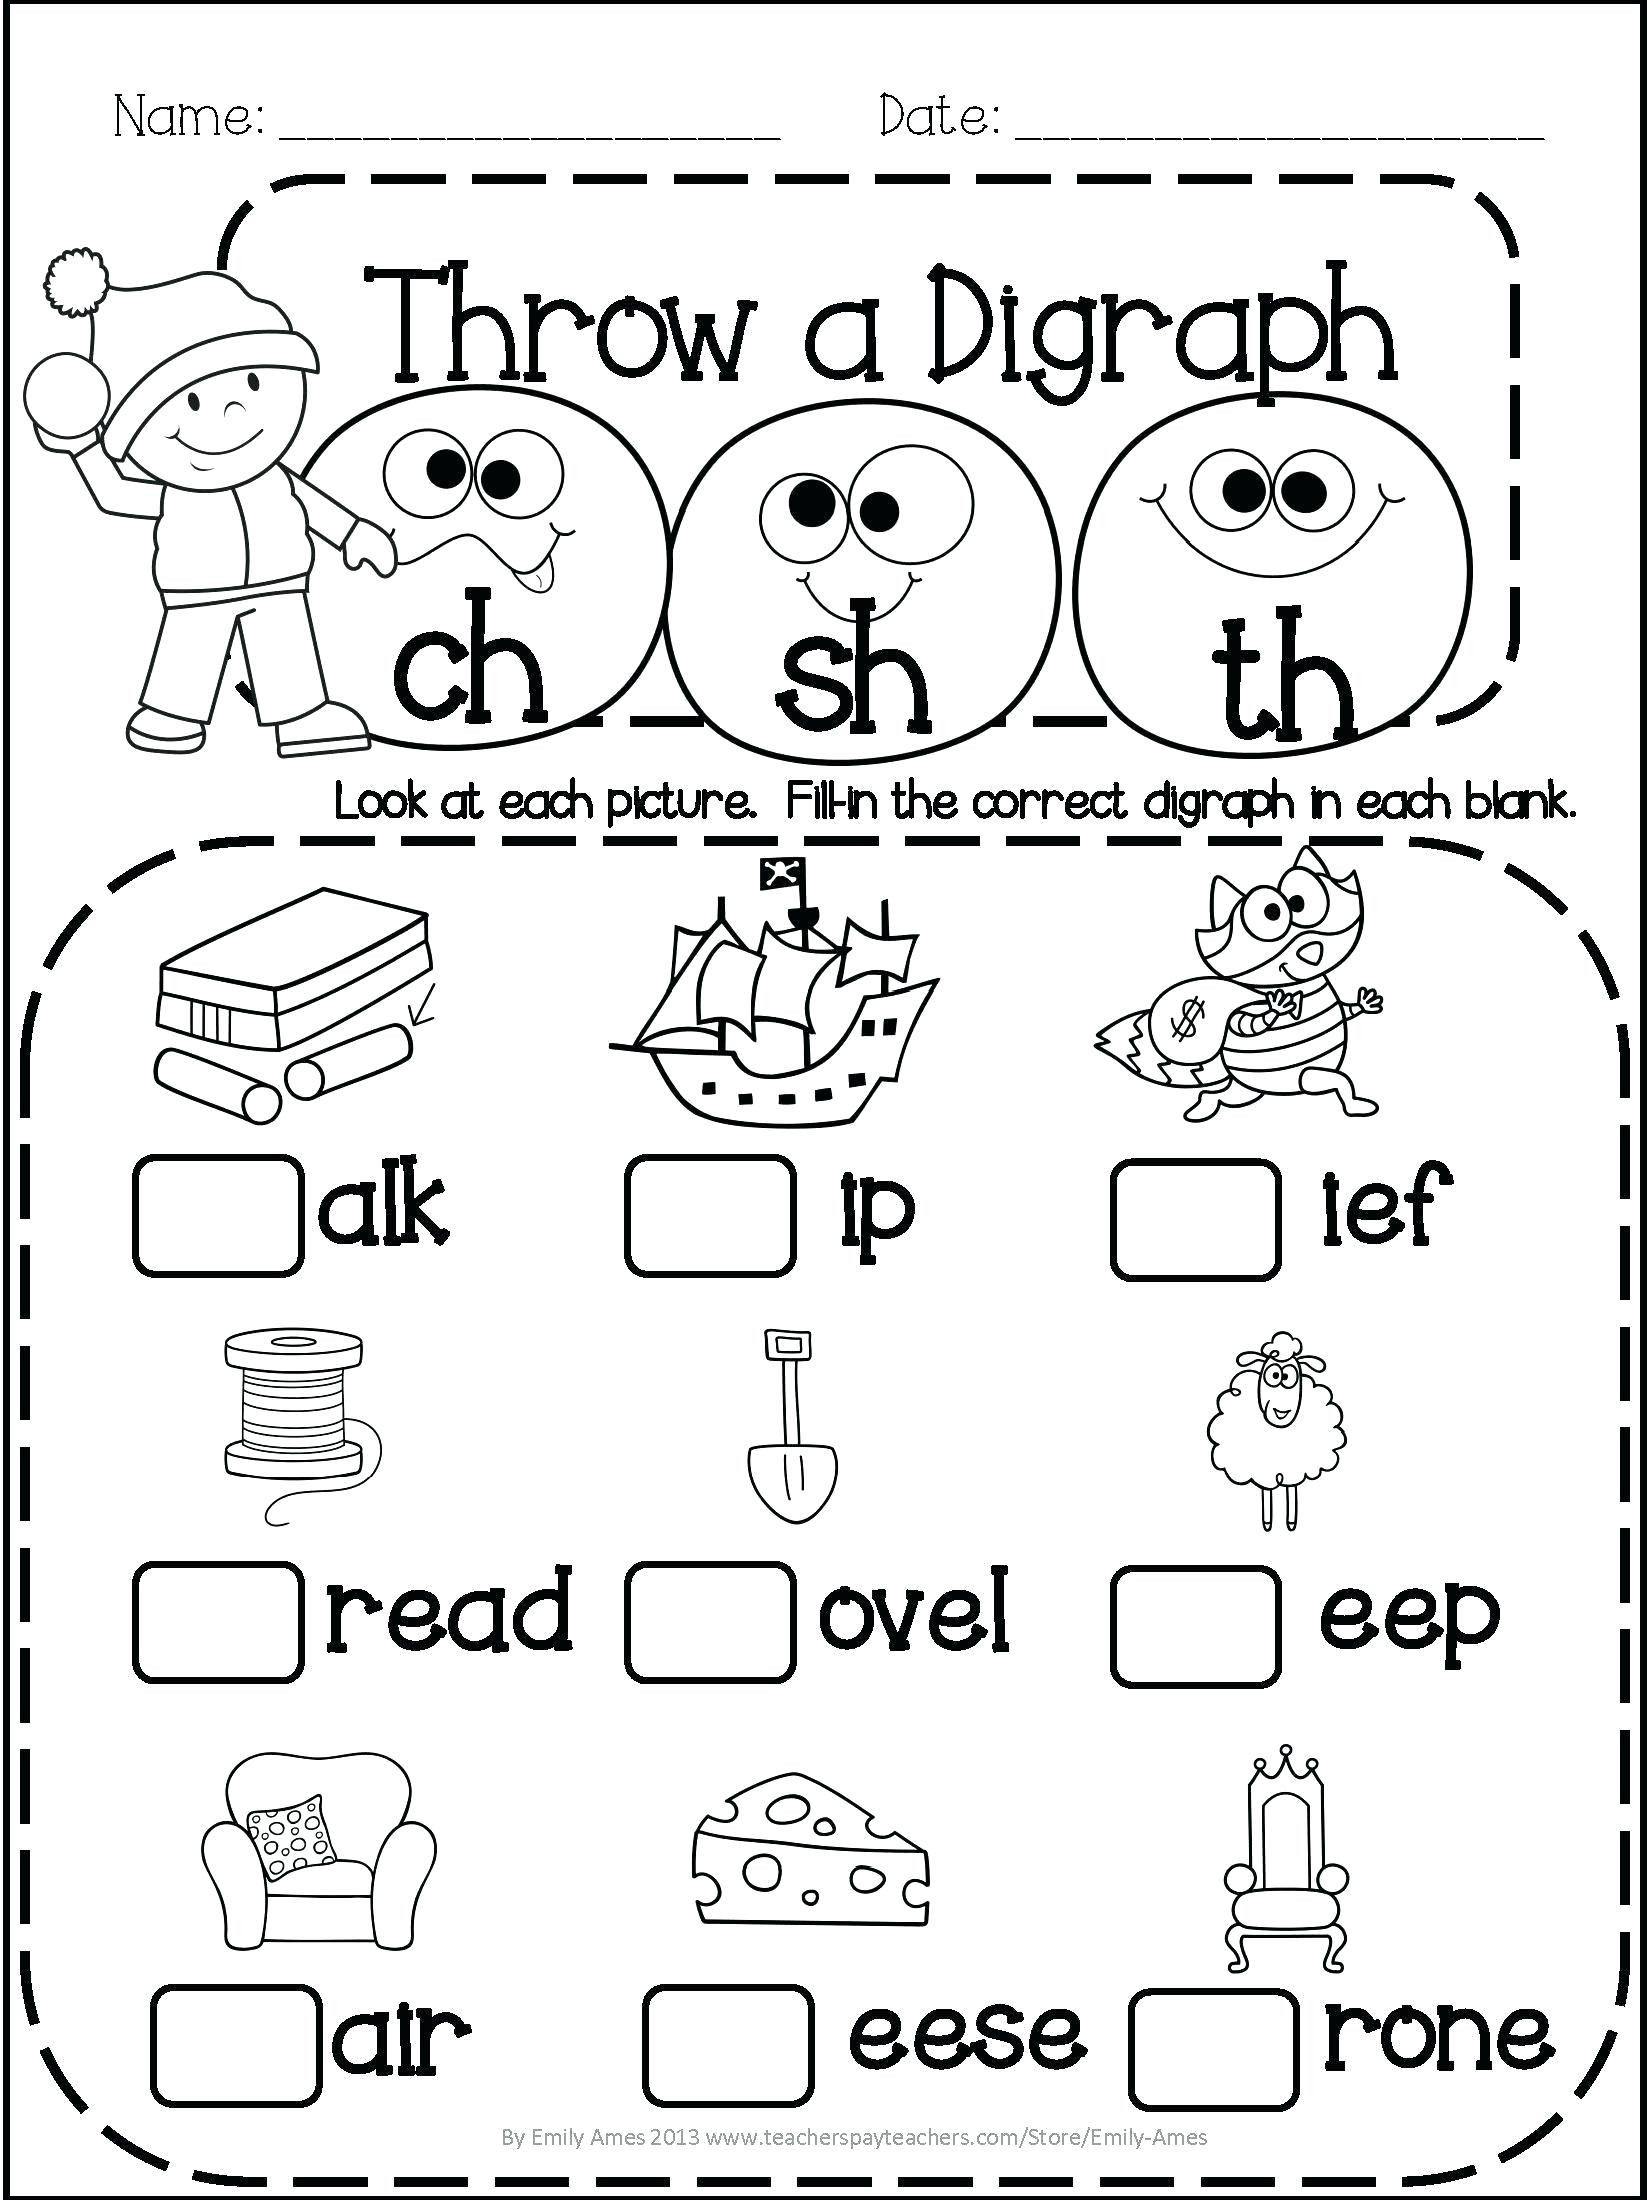 Free Math Worksheets Third Grade 3 Addition Word Problems